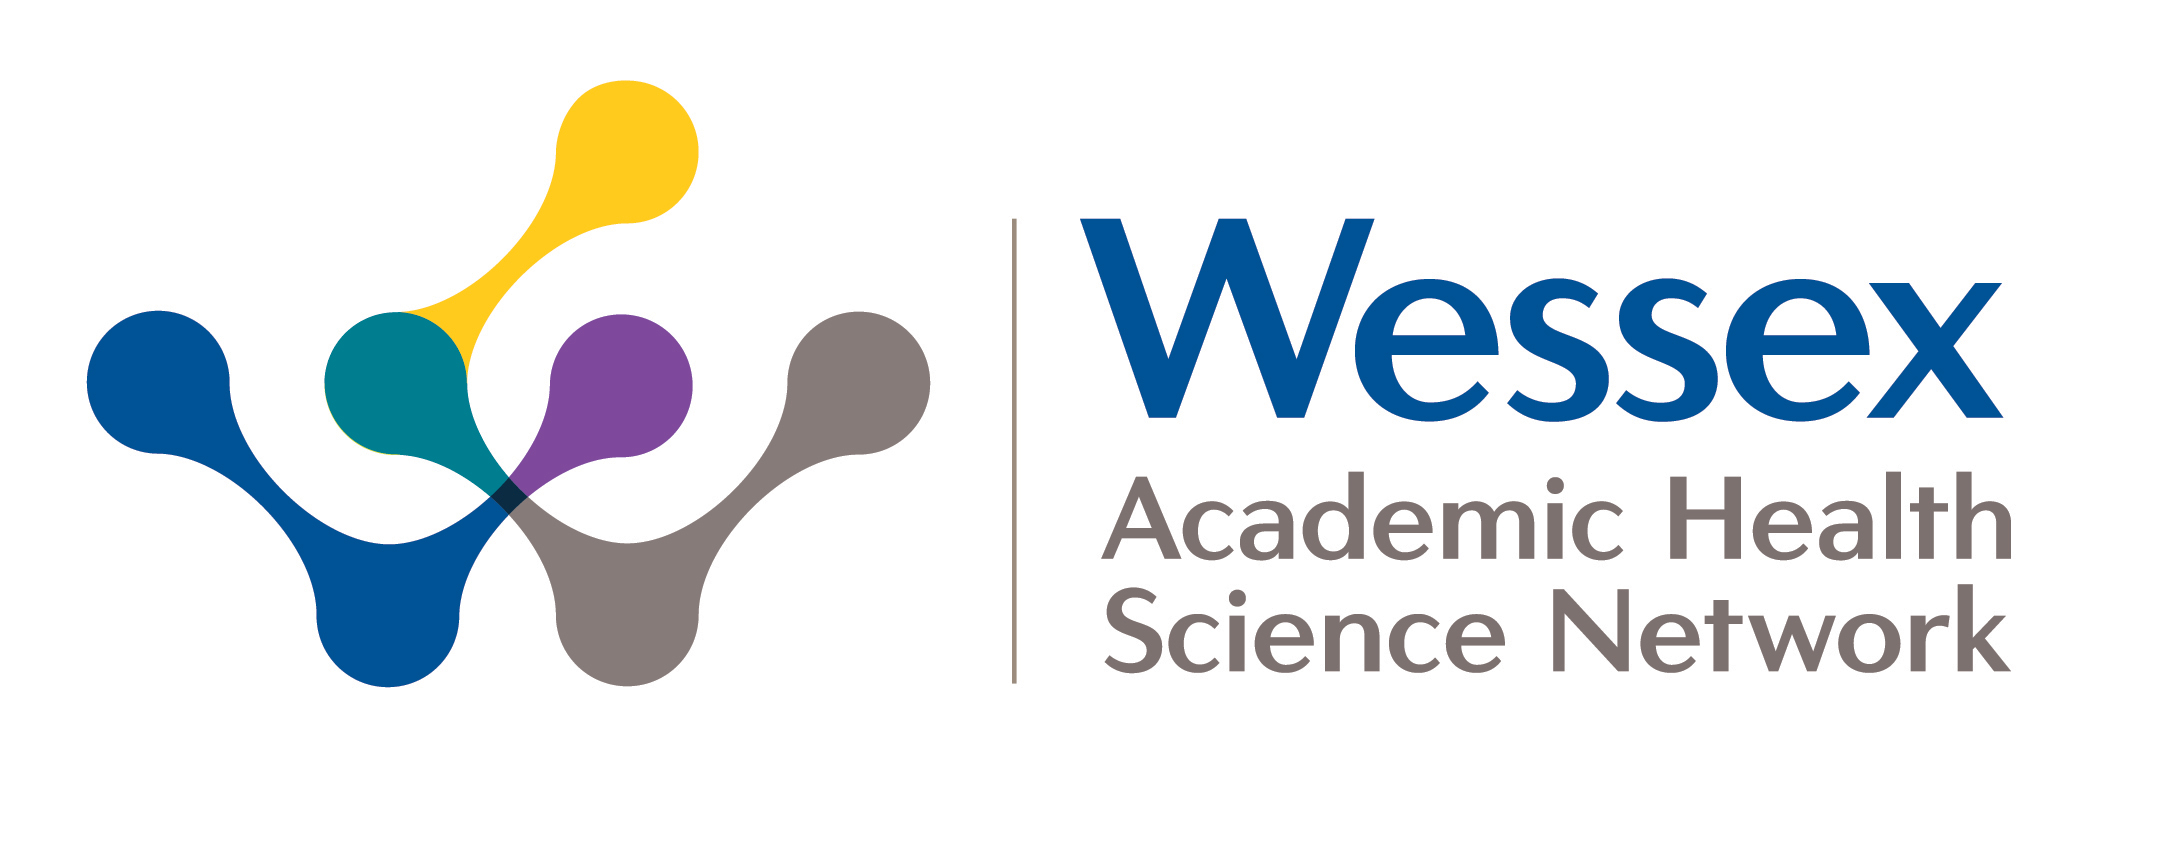 Wessex Academic Health Science Network logo